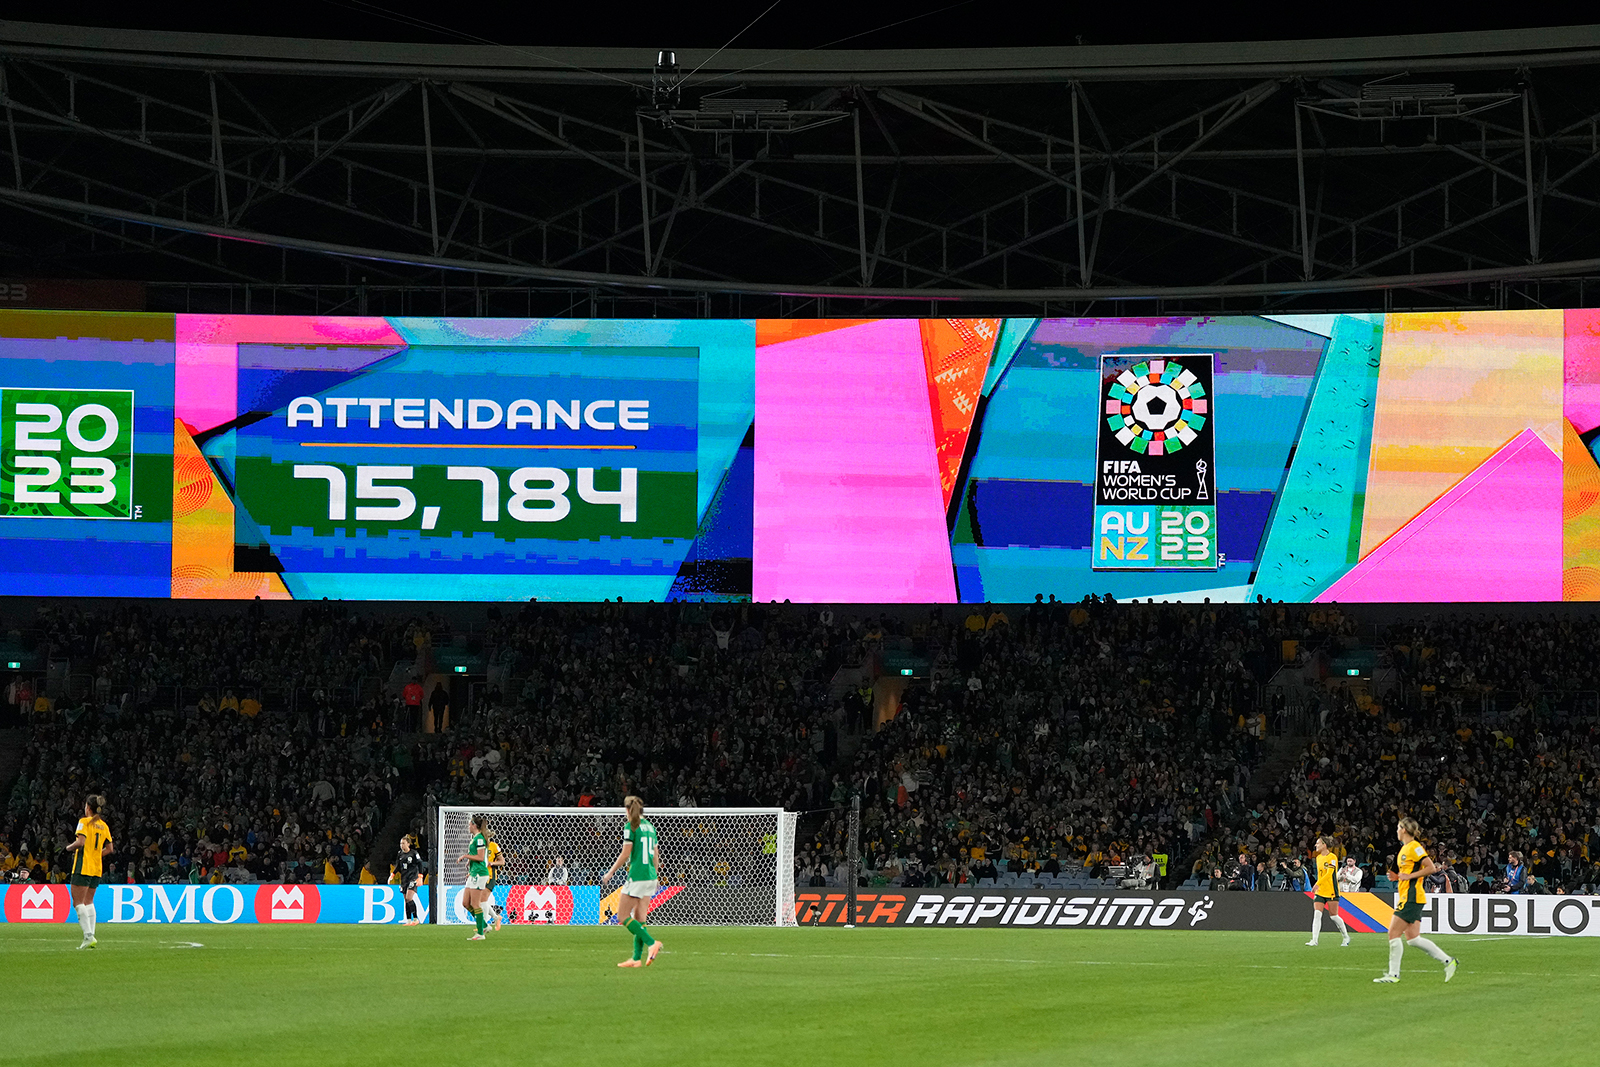 Screens show the attendance number of the match between Australia and Ireland on July 20. 